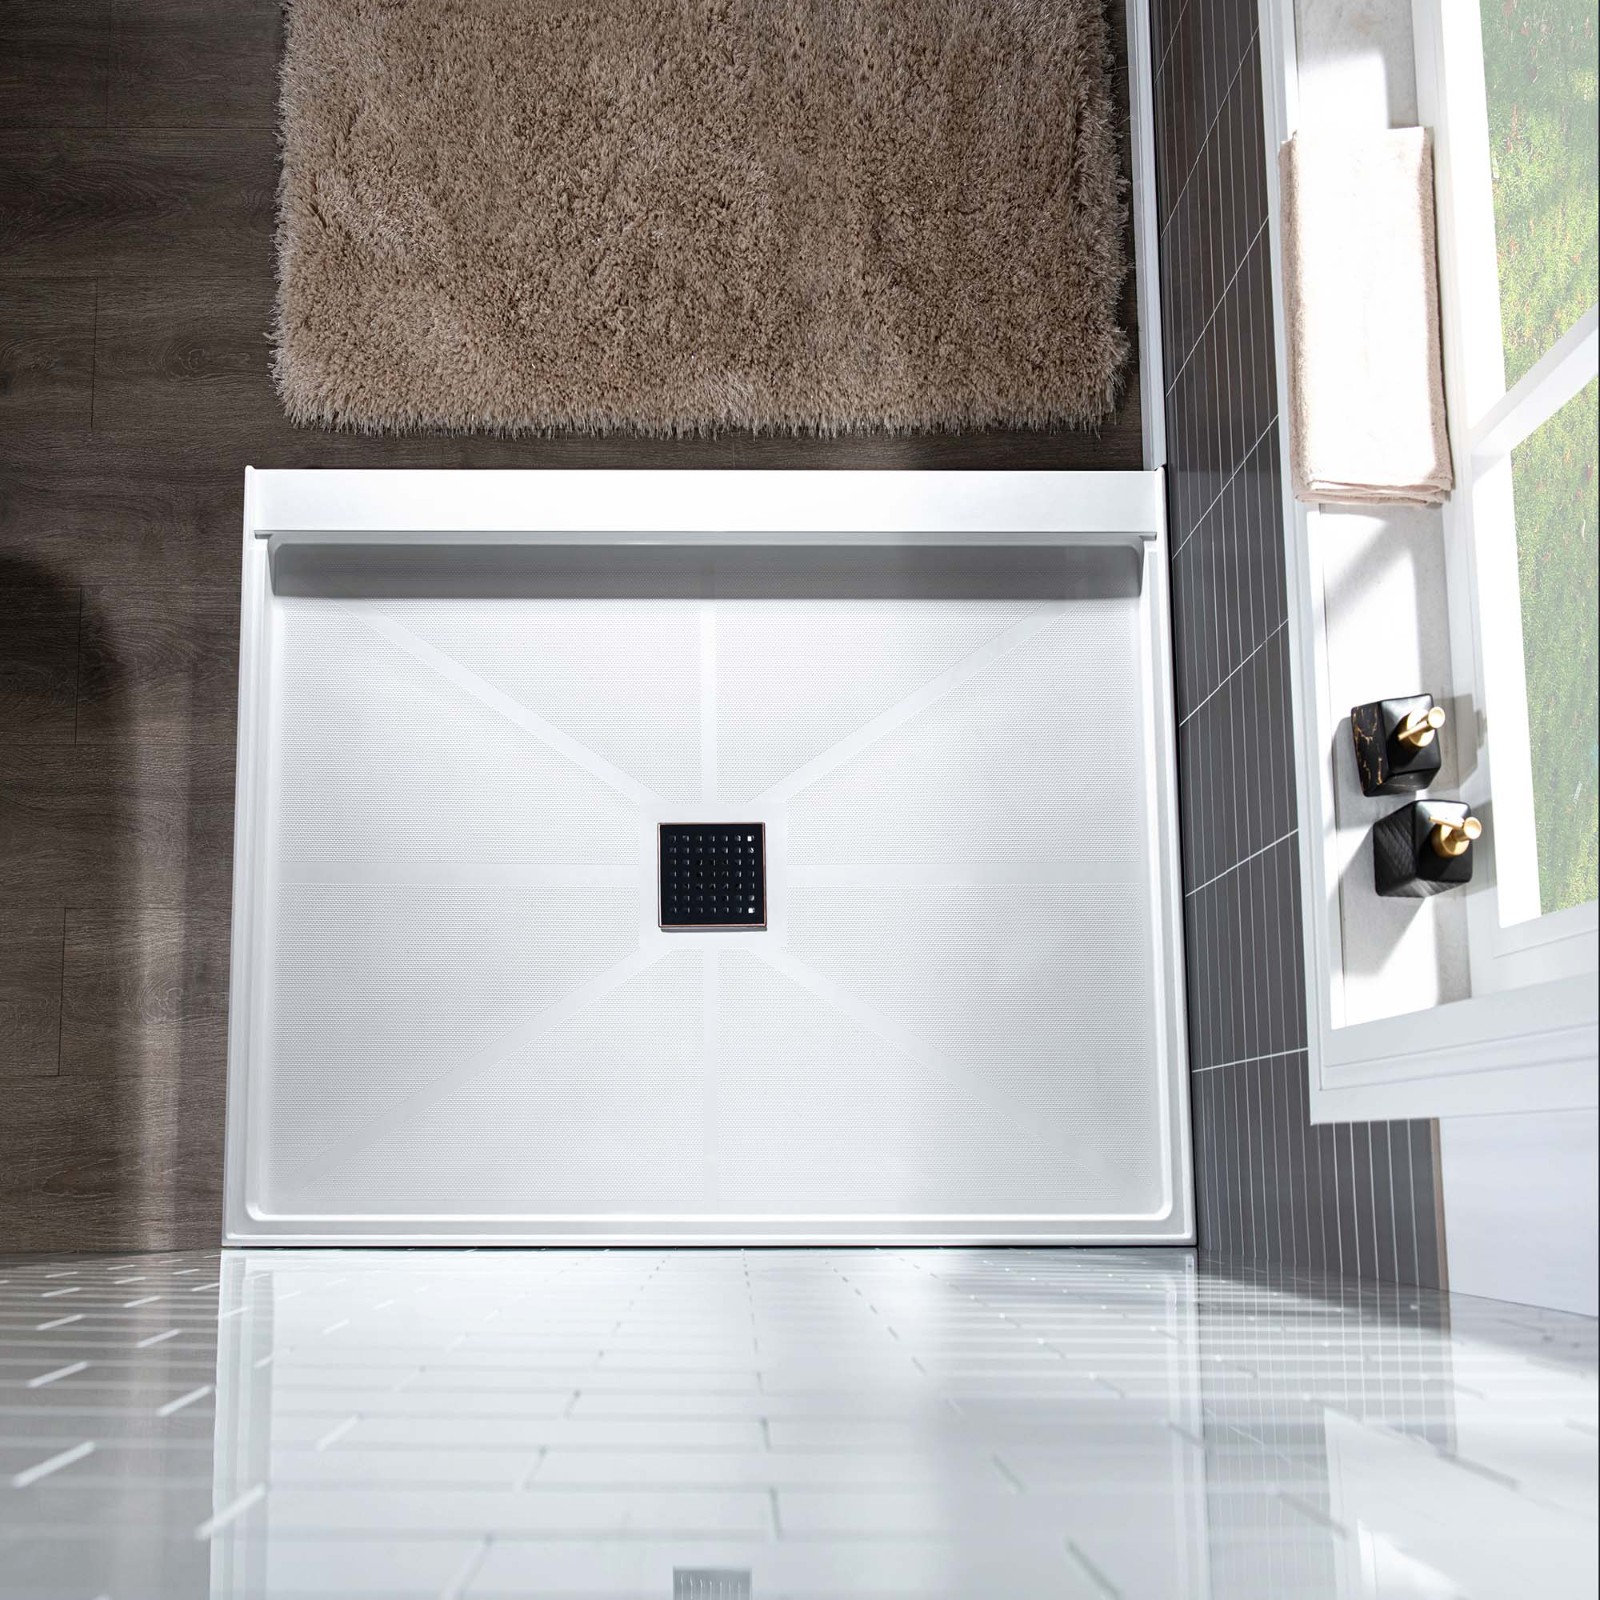  WOODBRIDGE SBR3636-1000C-ORB SolidSurface Shower Base with Recessed Trench Side Including Oil Rubbed Bronze Linear Cover, 36